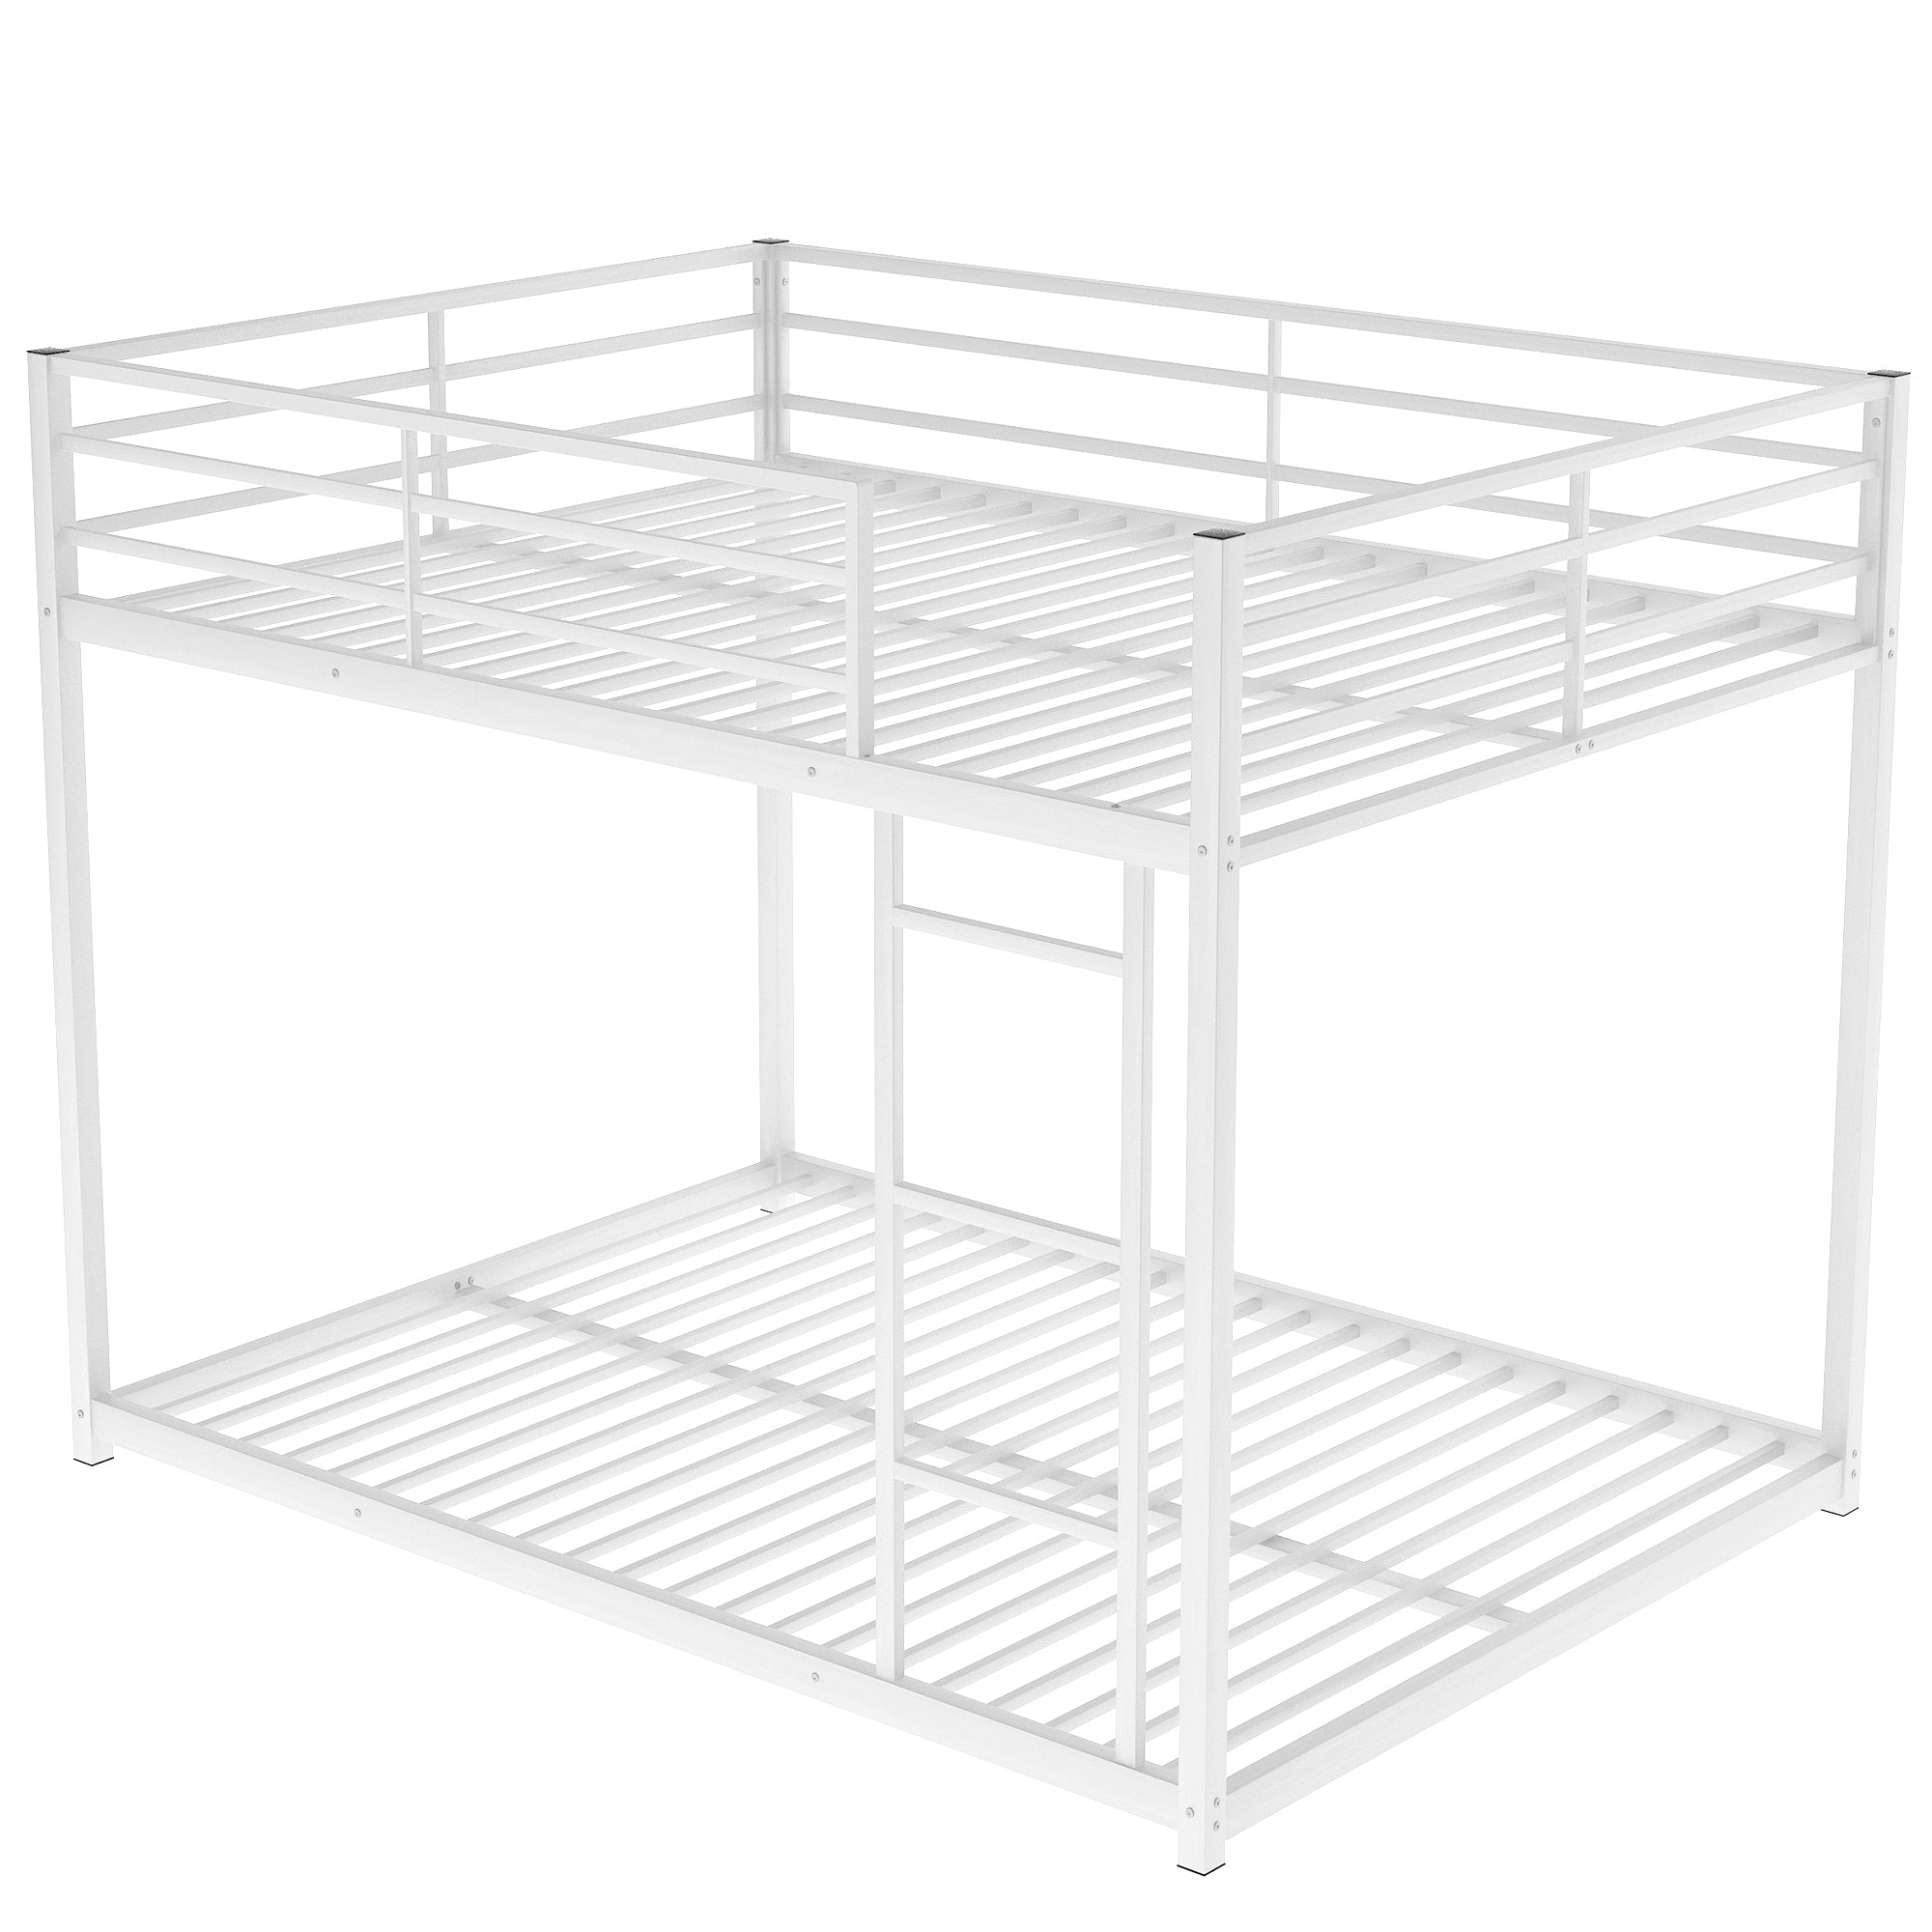 Full over Full Metal Bunk Bed, Low Bunk Bed with white-metal